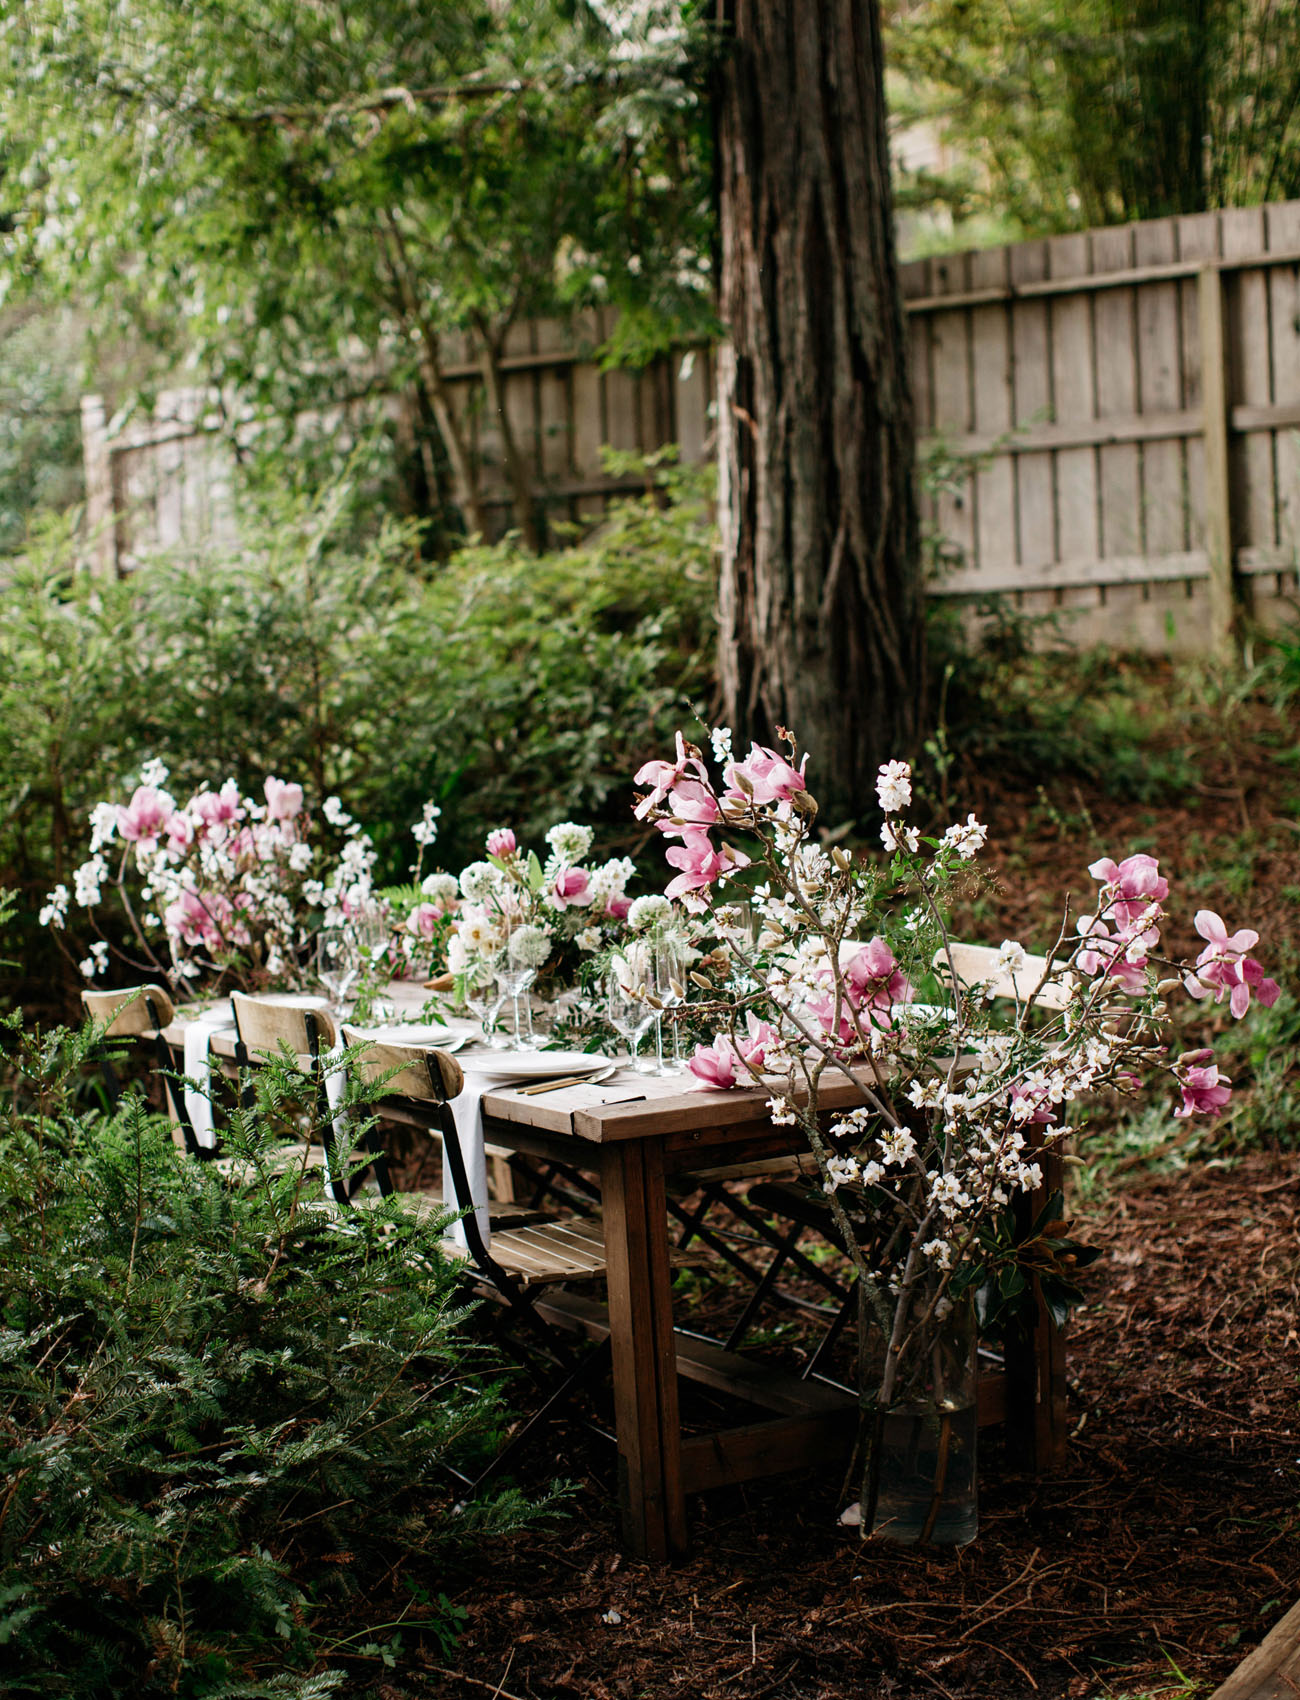 02 Rustic woodland wedding table setting with pink florals